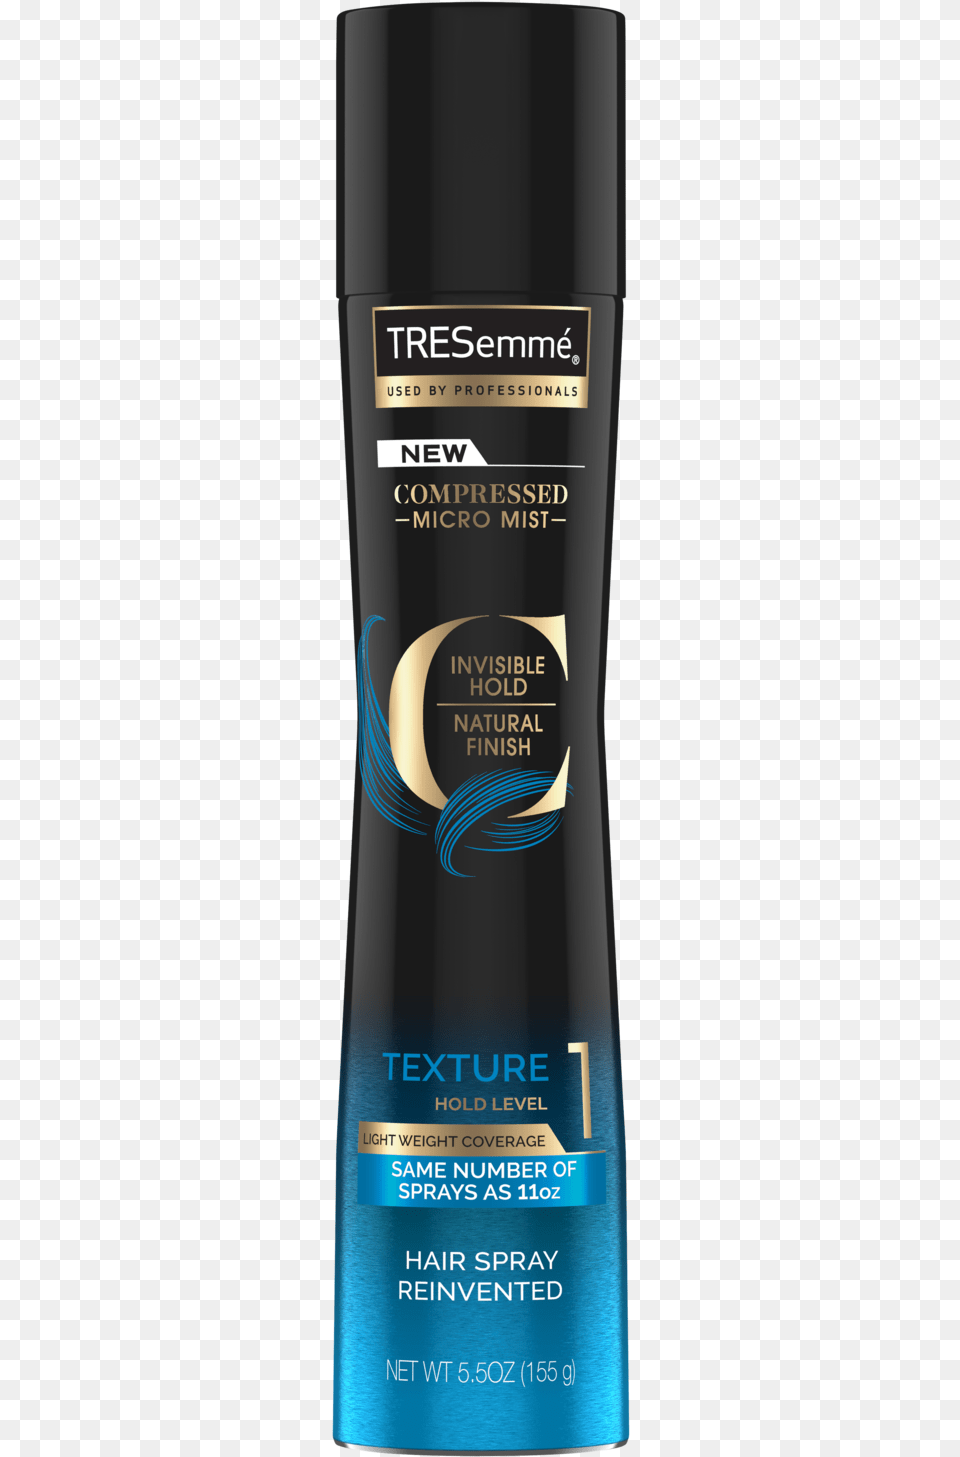 Tresemme Compressed Micro Mist Hair Spray Tresemme Compressed Micro Mist, Cosmetics, Deodorant, Can, Tin Free Png Download